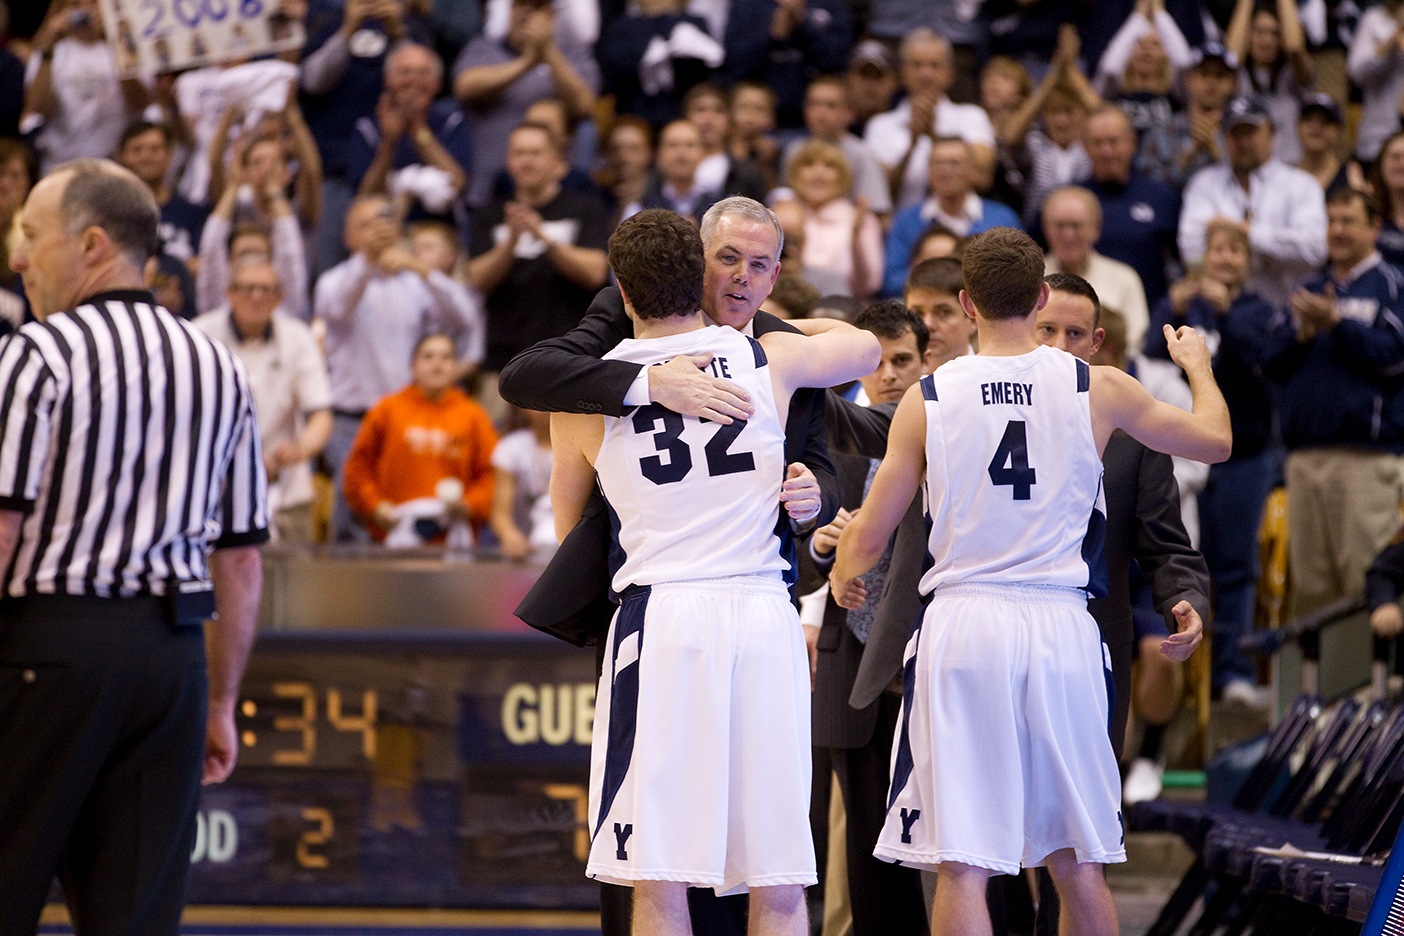 Coach Dave Rose and Jimmer Fredette hug at a BYU game as fans watch from the stands.